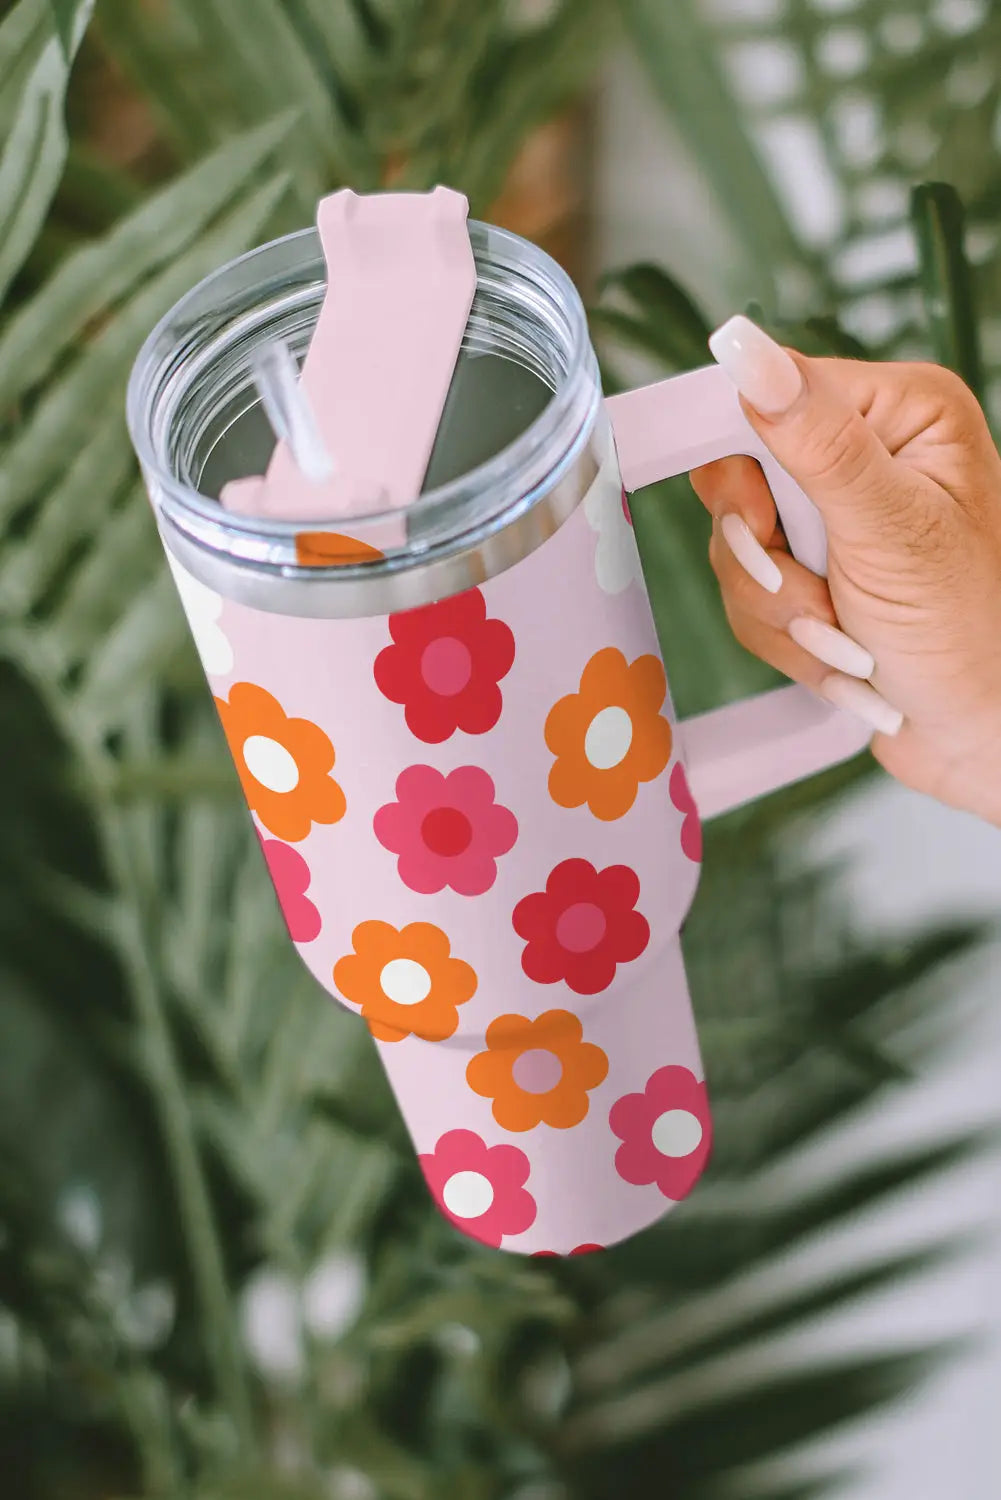 Multicolor flower print handled stainless steel vacuum cup - one size / 100% alloy - tumblers